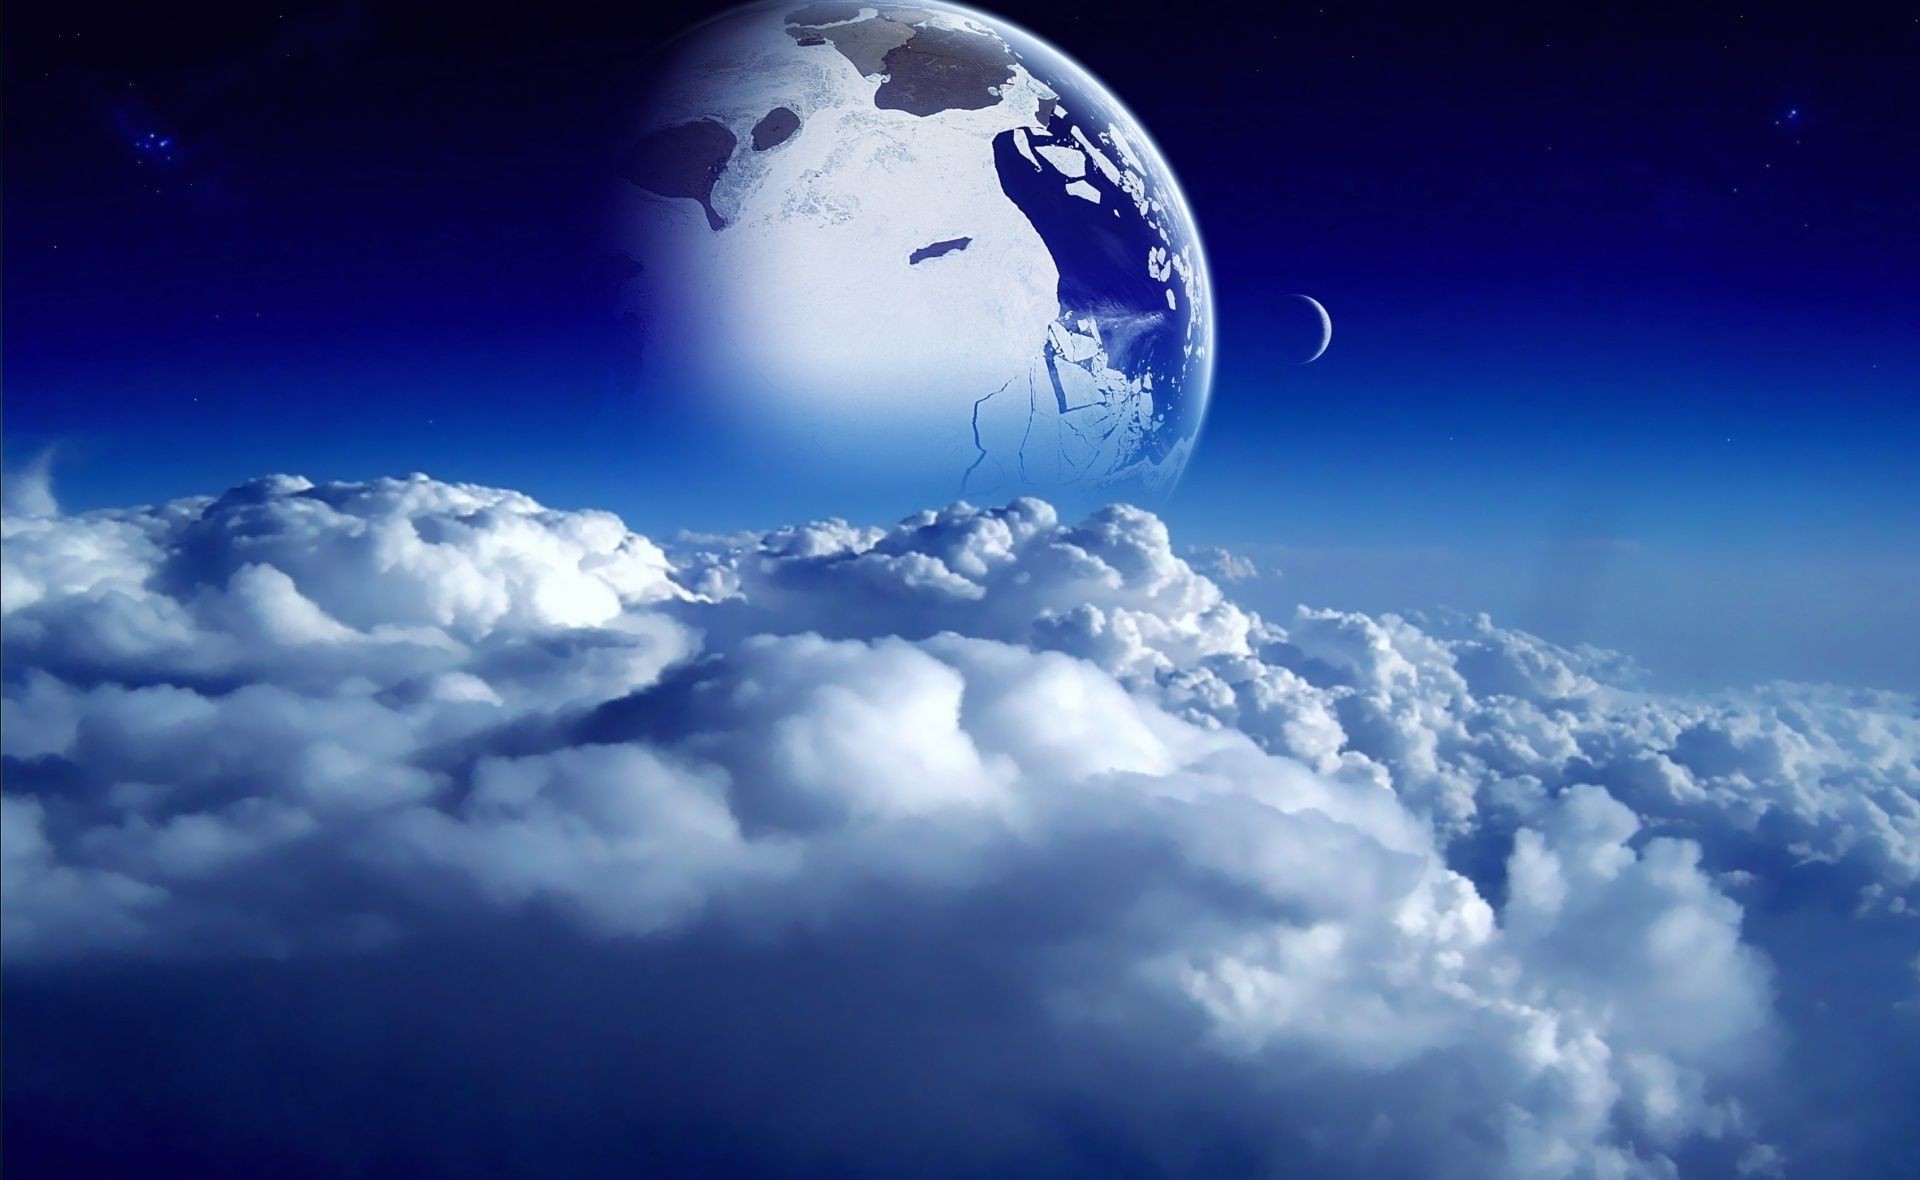 planets planet sky ball-shaped atmosphere moon space light desktop spherical cloud weather nature stratosphere sphere cloudy sun astronomy dark universe